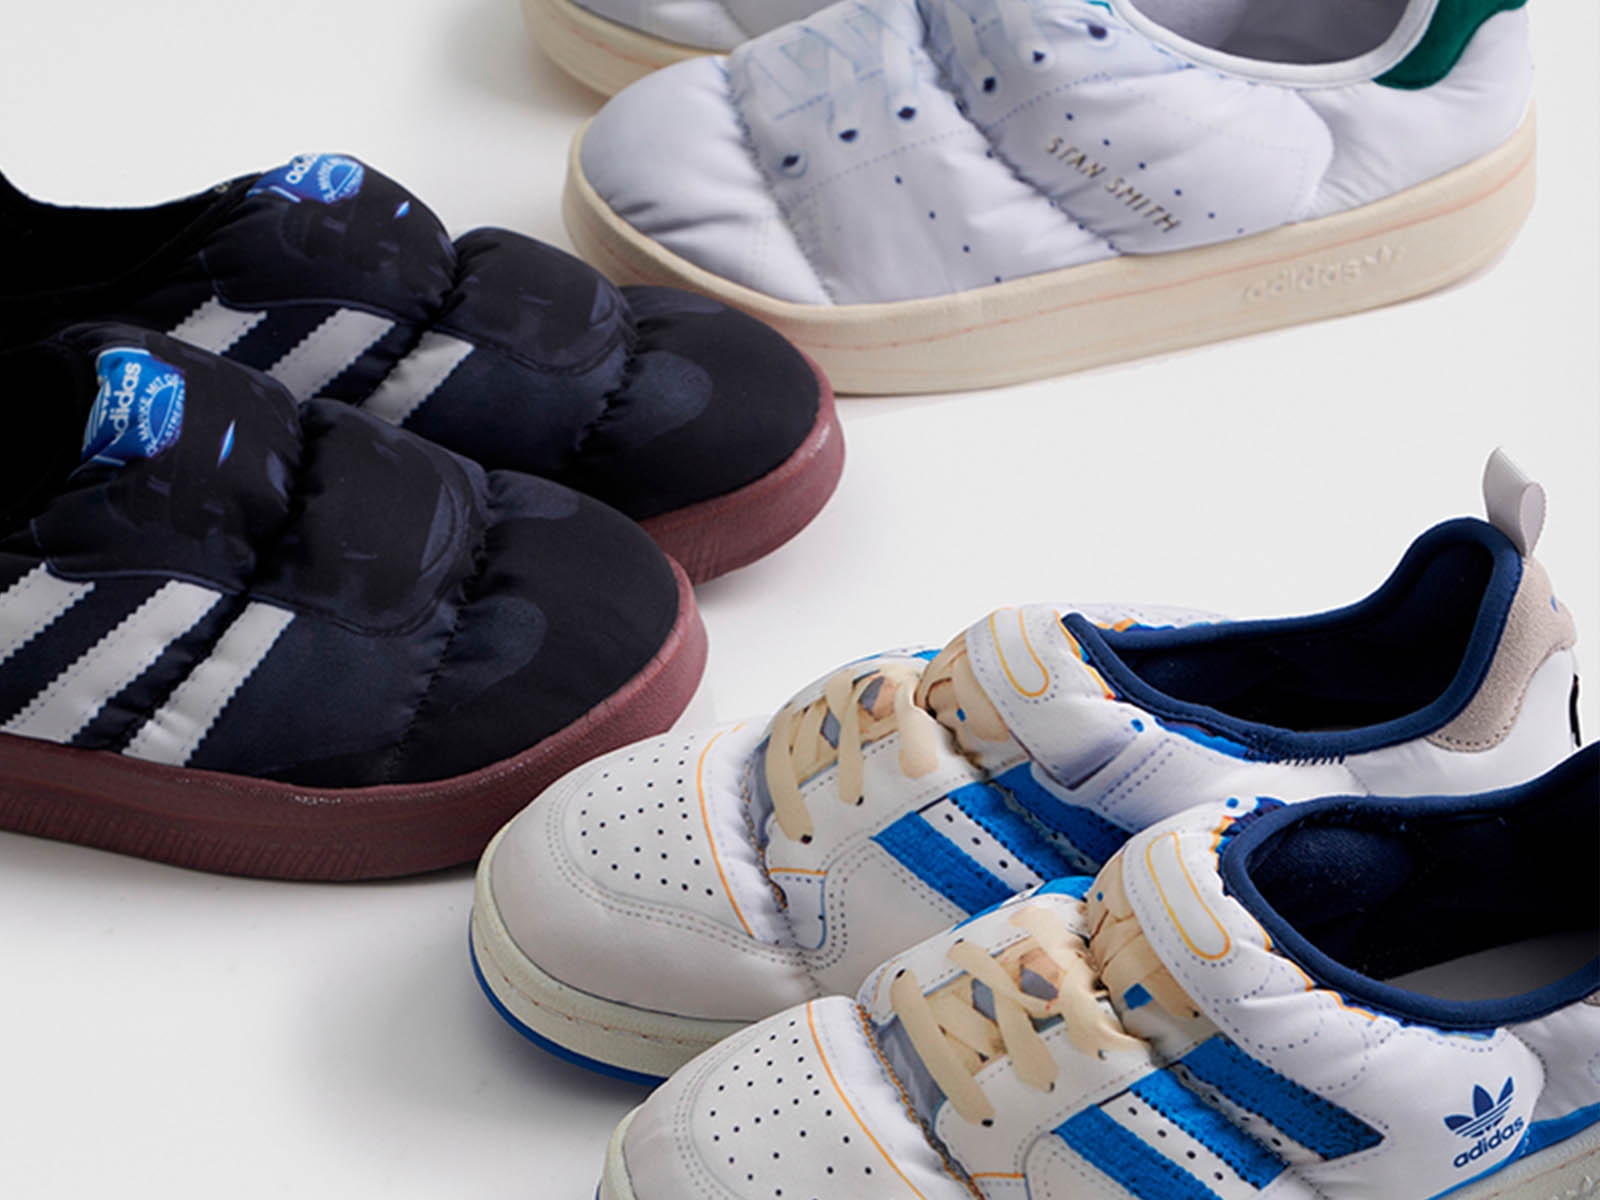 adidas Originals and Sporty & Rich go for vintage sportswear